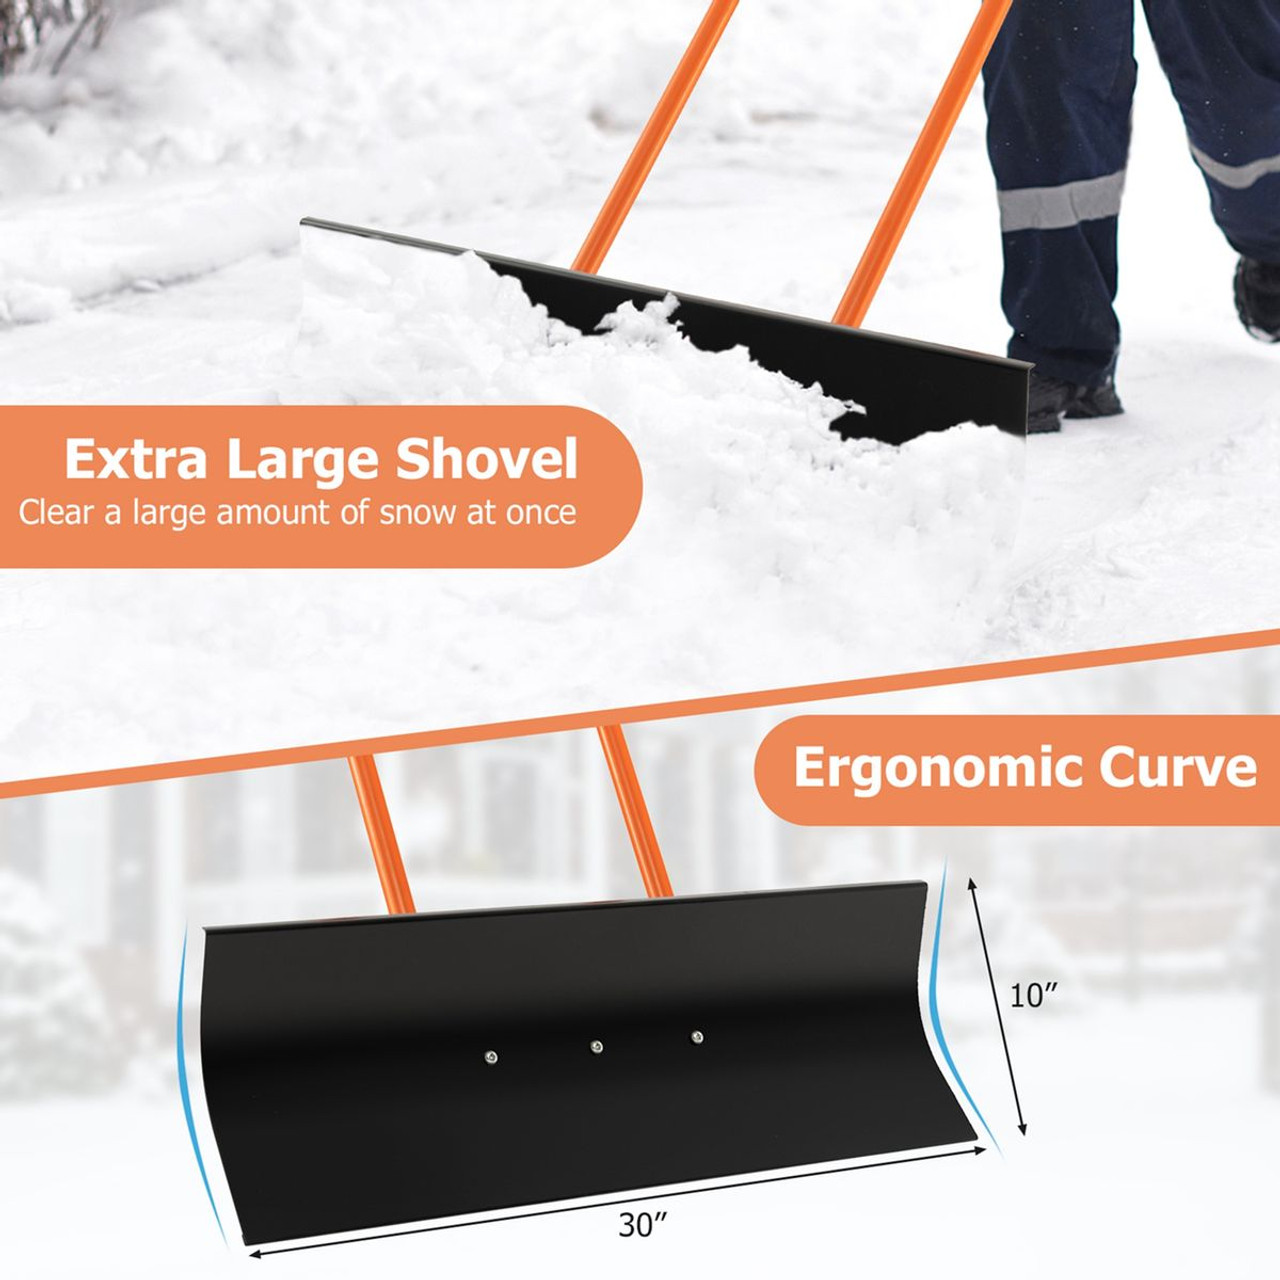 30-Inch Snow Shovel with Wheels & Adjustable Handle product image